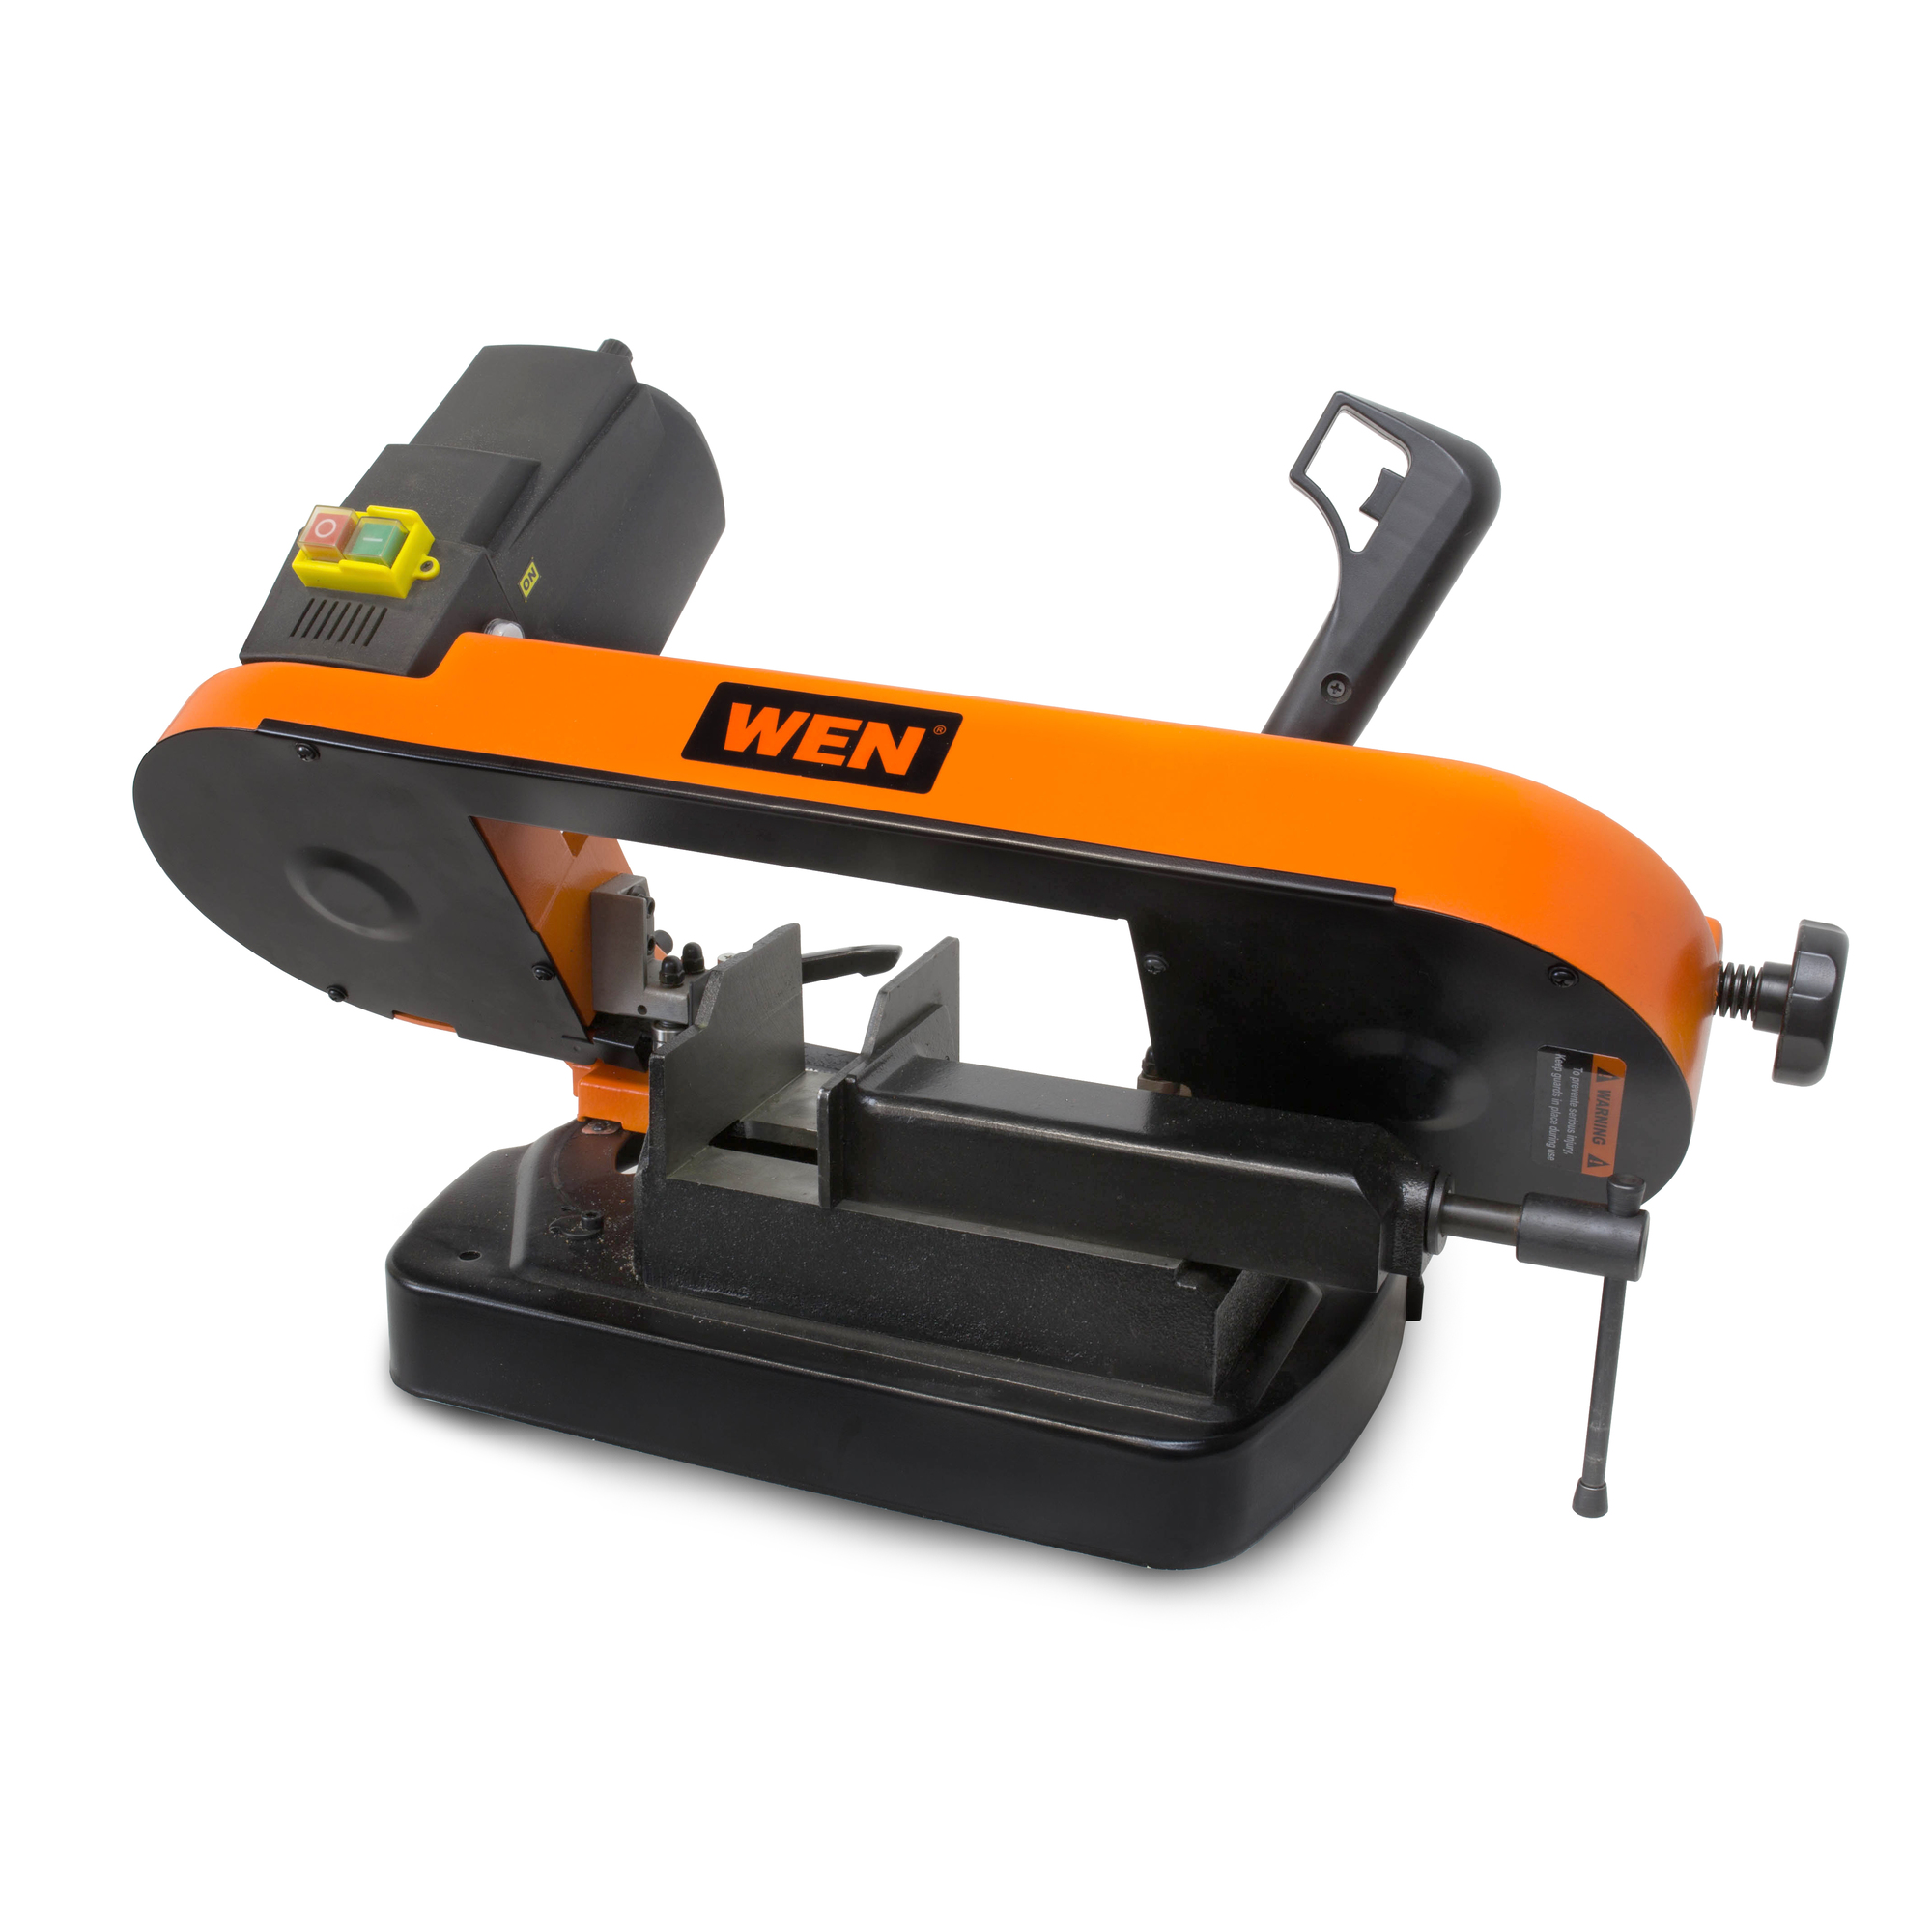 WEN, 5Inch Metal-Cutting Benchtop Bandsaw, Volts 120, Power Type Corded, Model BA4555